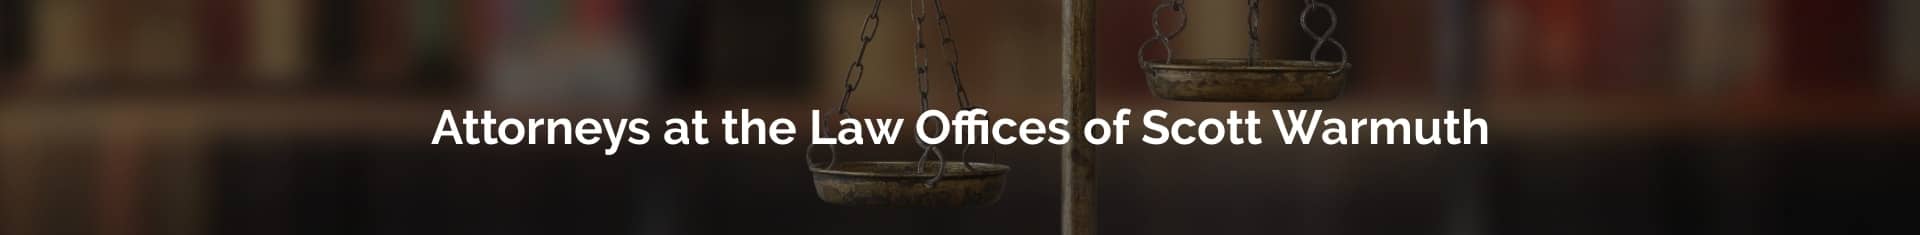 Attorneys at the Law Offices of Scott Warmuth